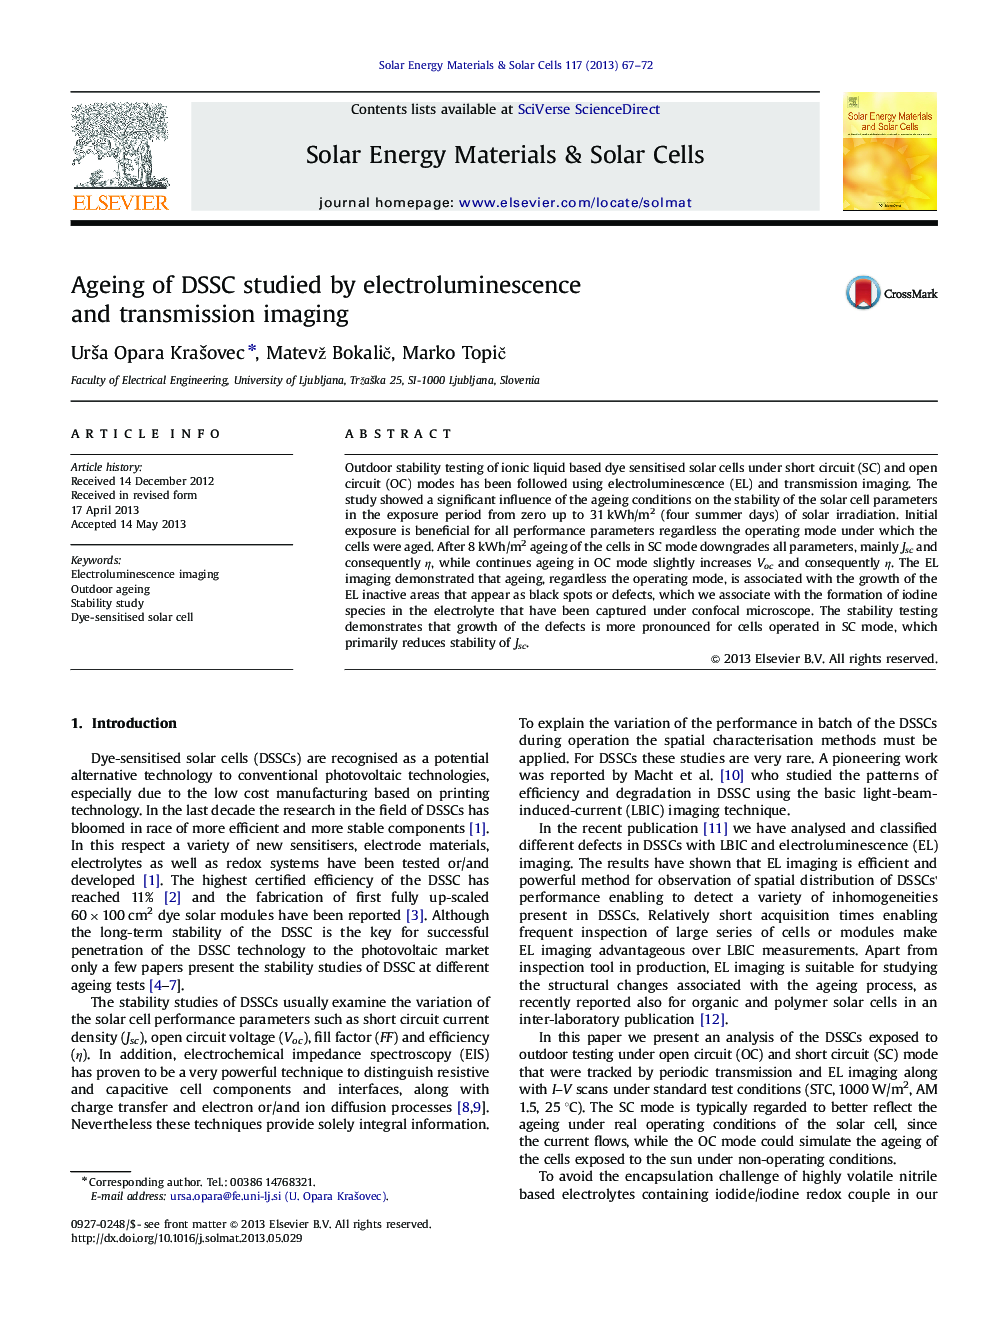 Ageing of DSSC studied by electroluminescence and transmission imaging